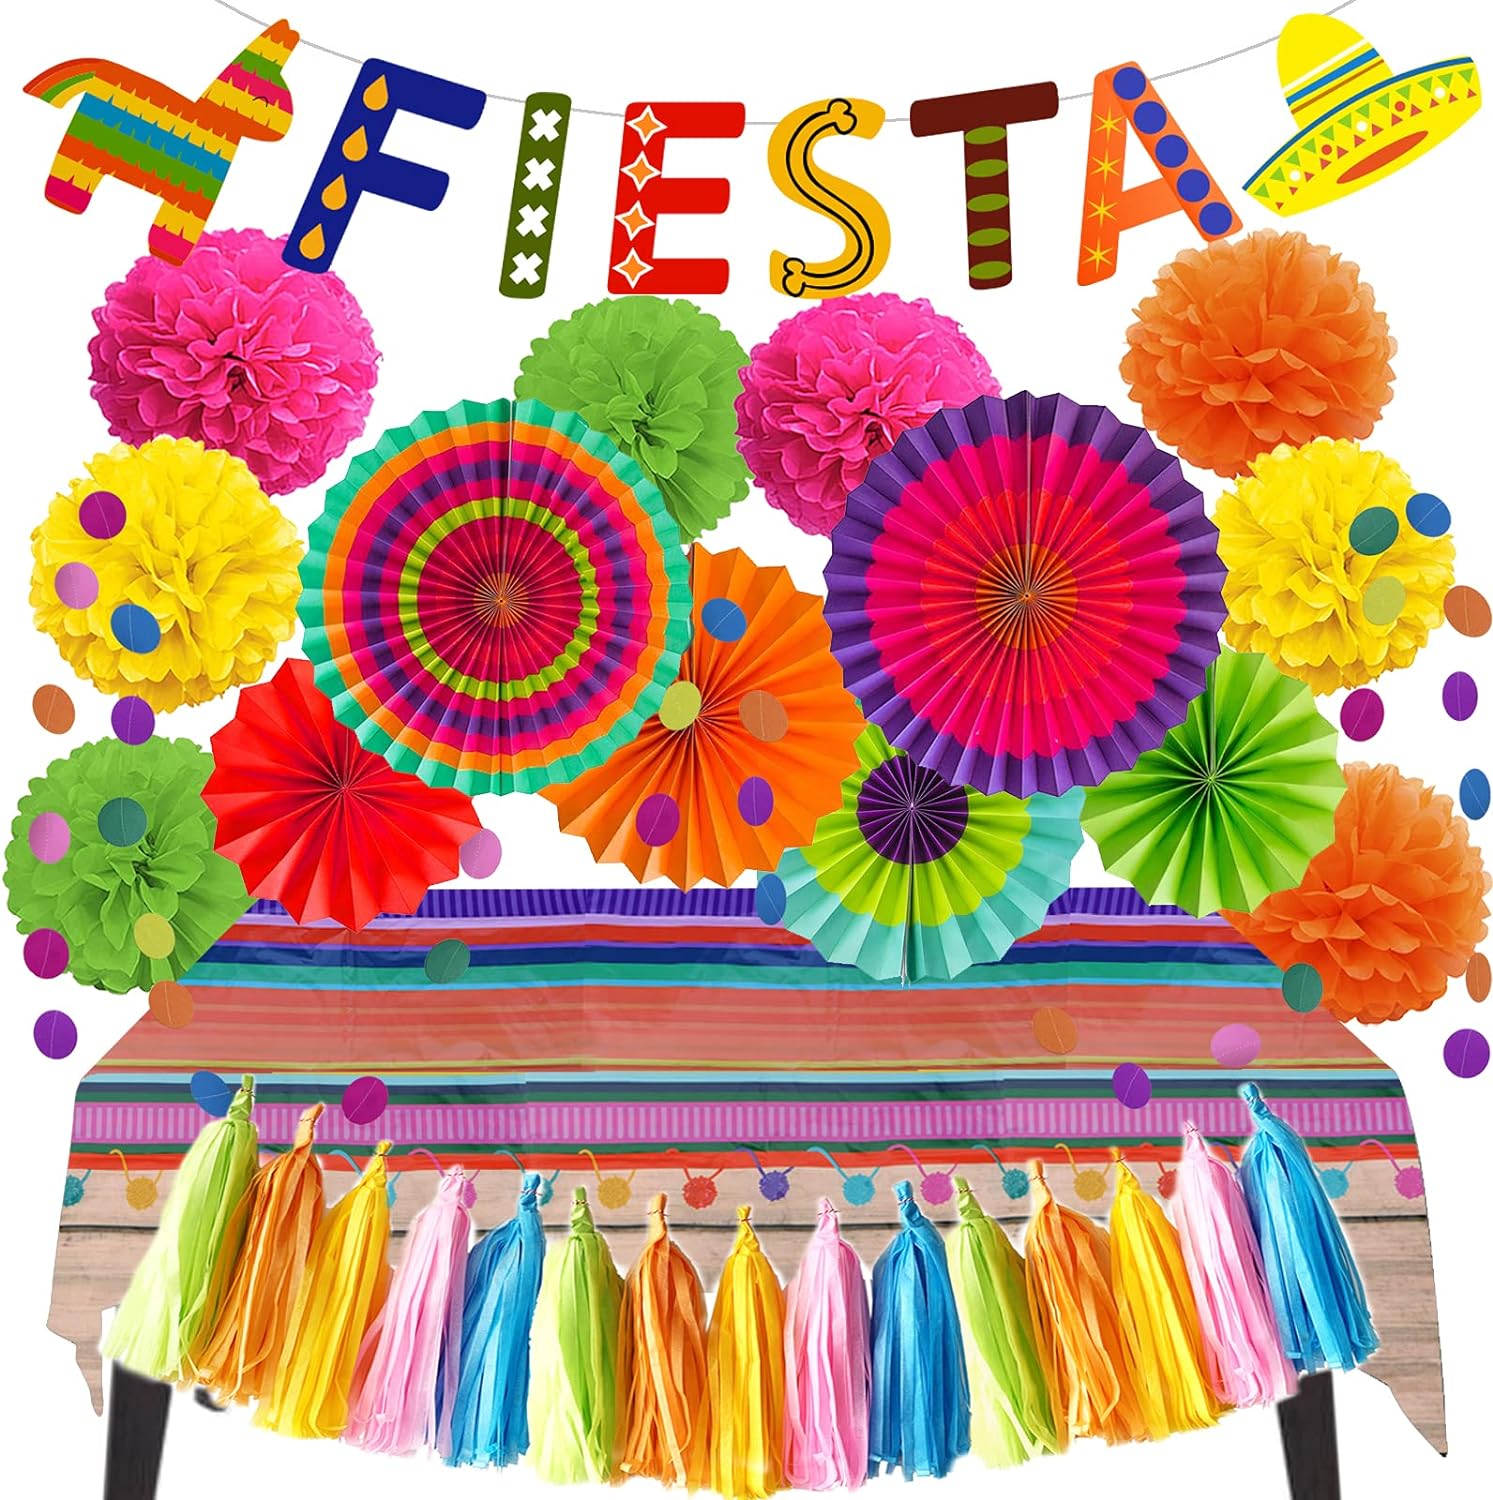 ZERODECO Fiesta Party Decorations, Multicolor Fiesta Banner Paper Fans Pompoms Tissue Paper Tassel Tablecloth Garlands String for Fiesta Mexican Theme Cinco De Mayo Coco Carnivals Festivals Party